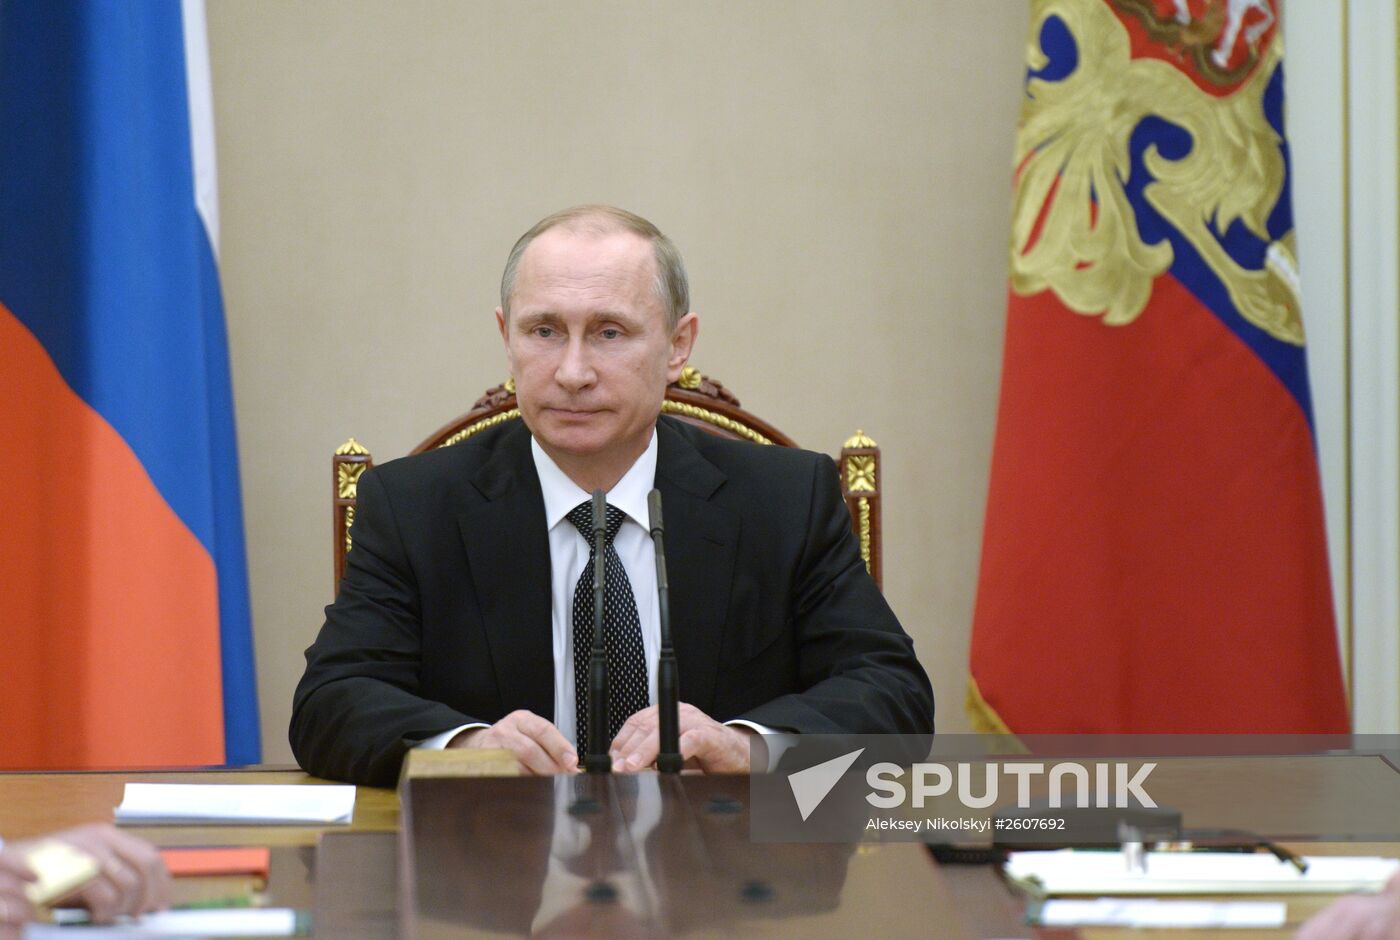 President Putin holds meeting with Russian Security Council permanent members